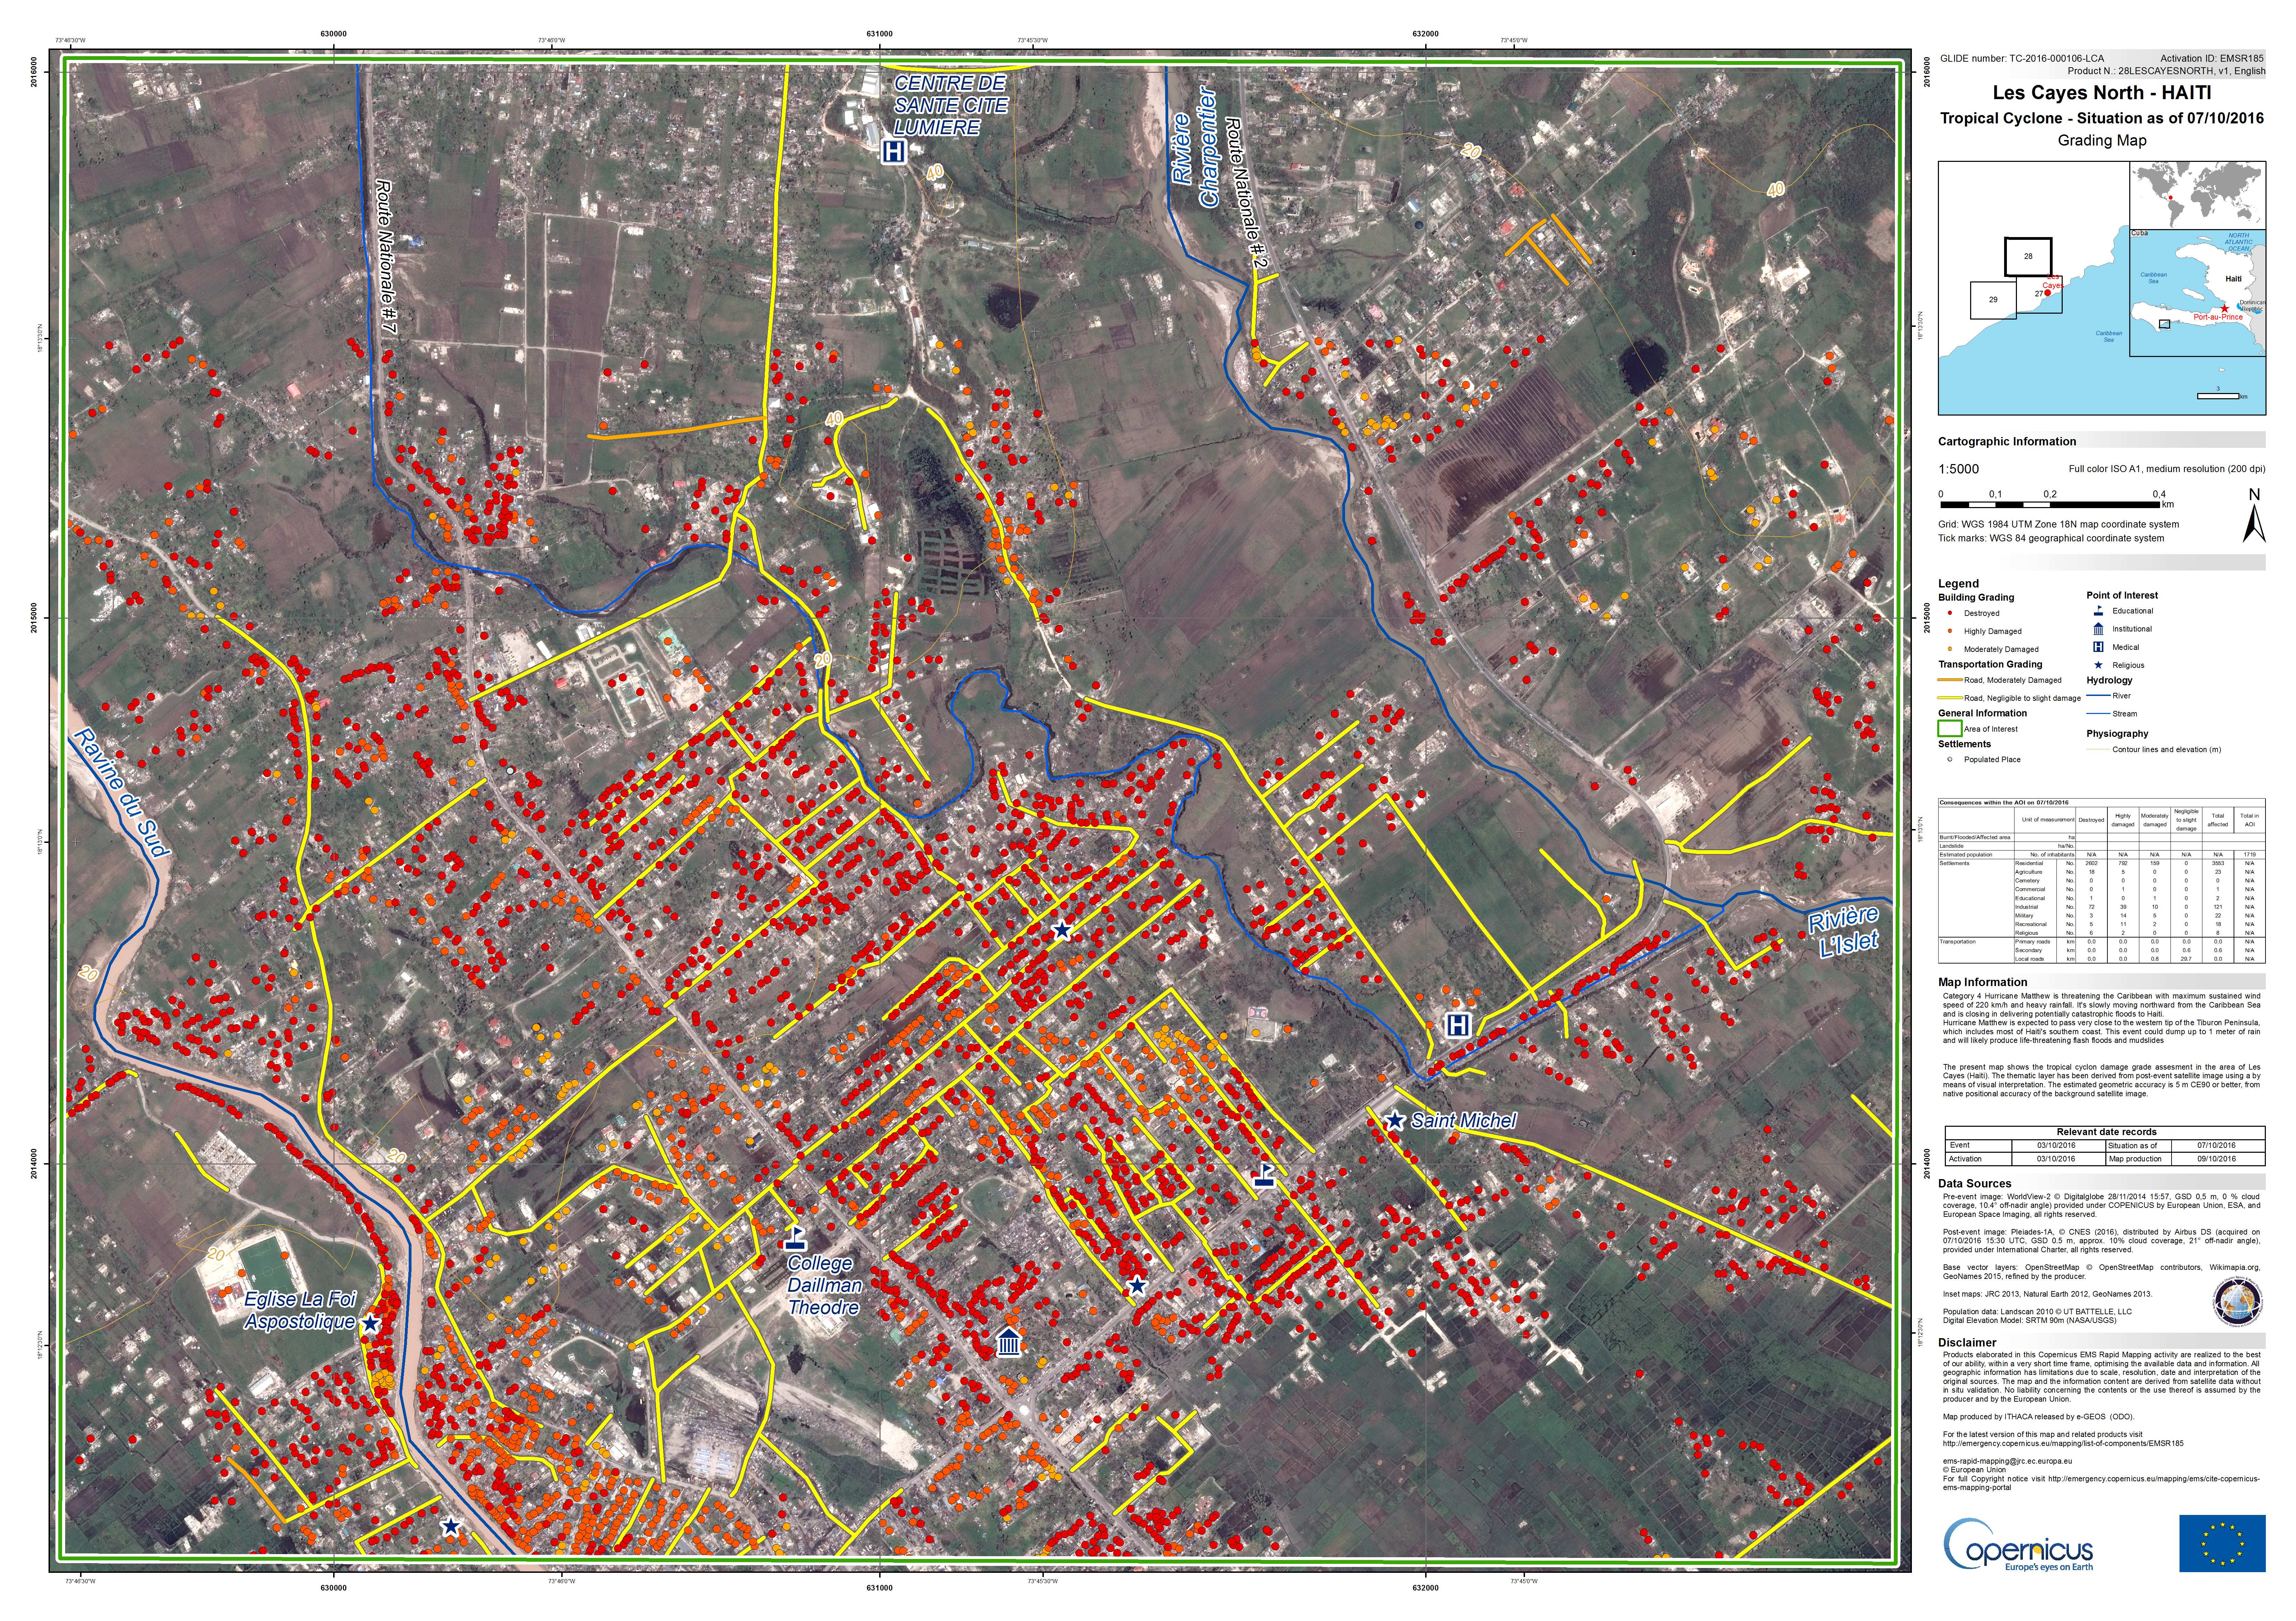 Matthew - Haiti - Cartographie rapide - Rapid mapping - Copernicus - Emergency mapping service - Les cayes - dégâts - grading map - Commission européenne - satellite d'observation